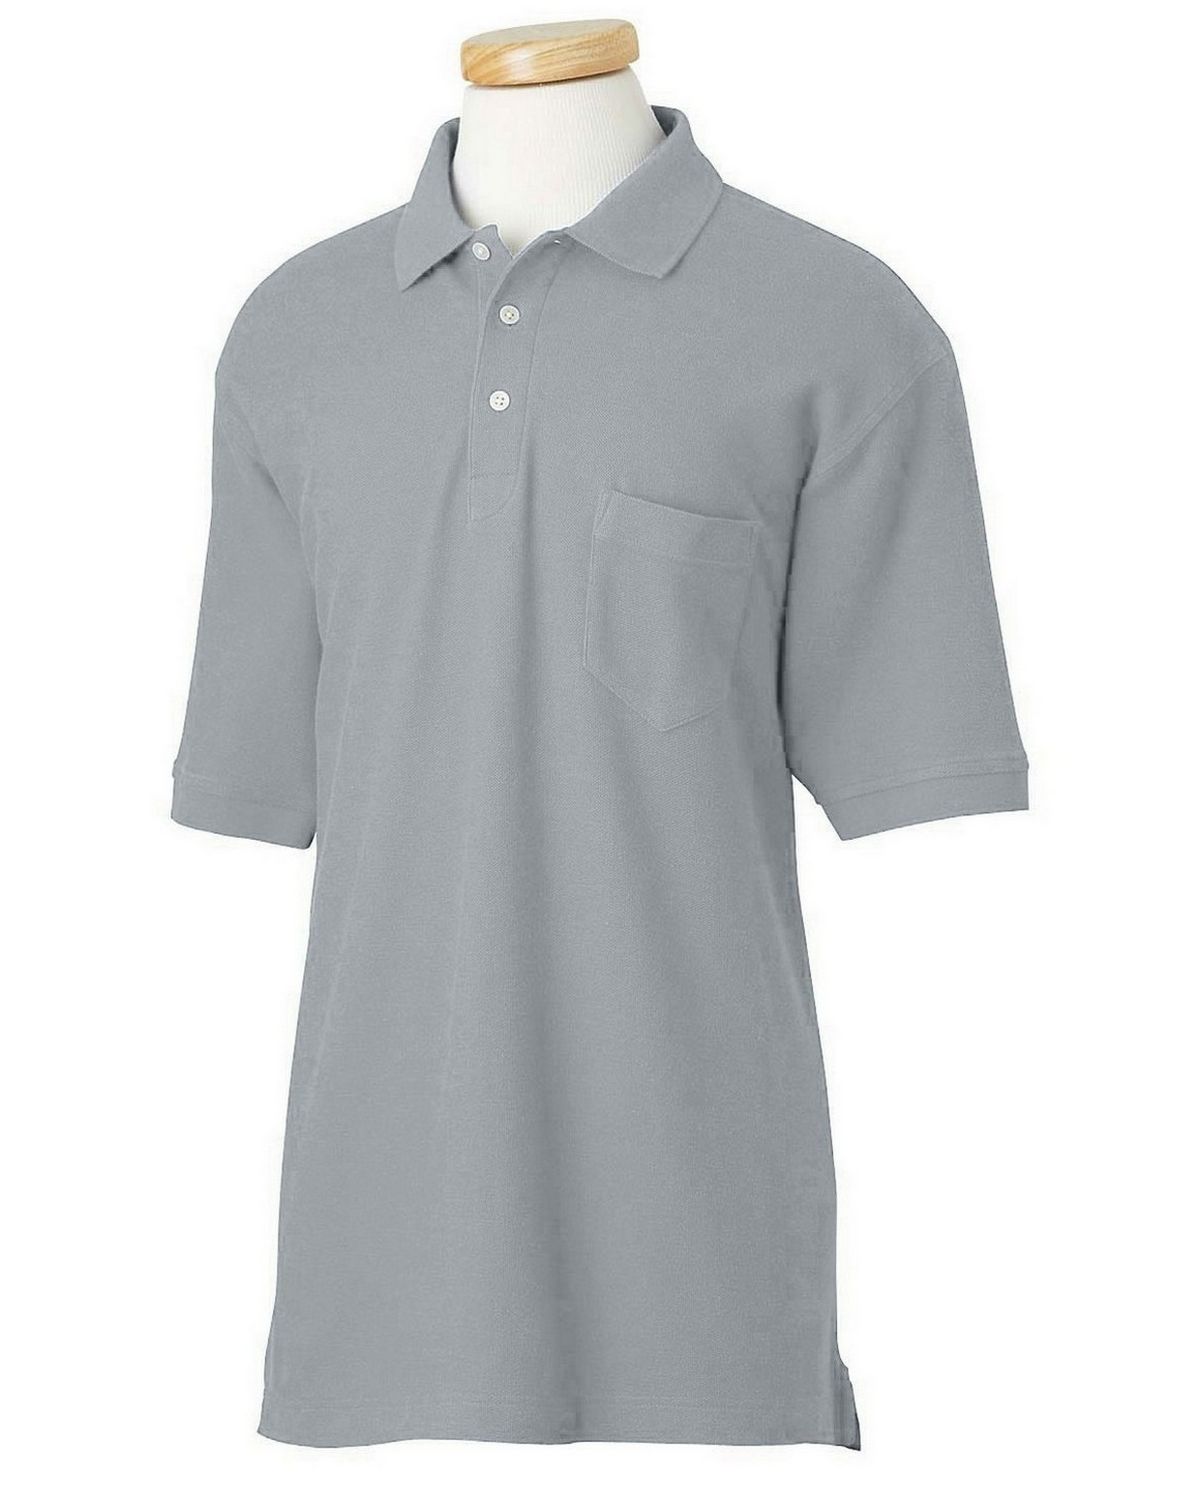 Chestnut Hill CH100P Performance Plus Pique Polo with Pocket ...